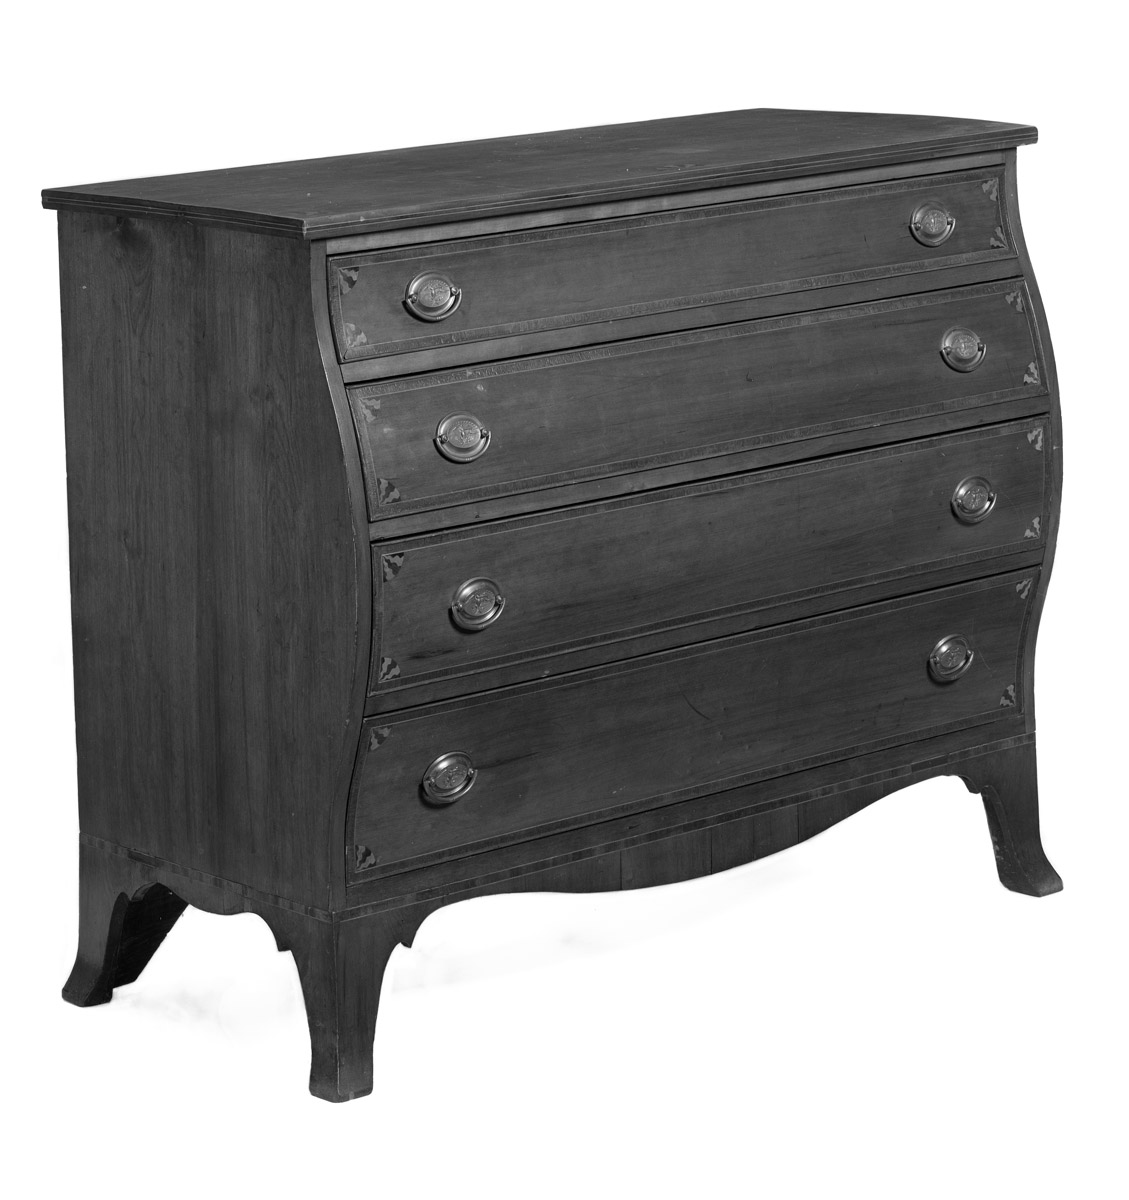 1951.0025 Chest of drawers